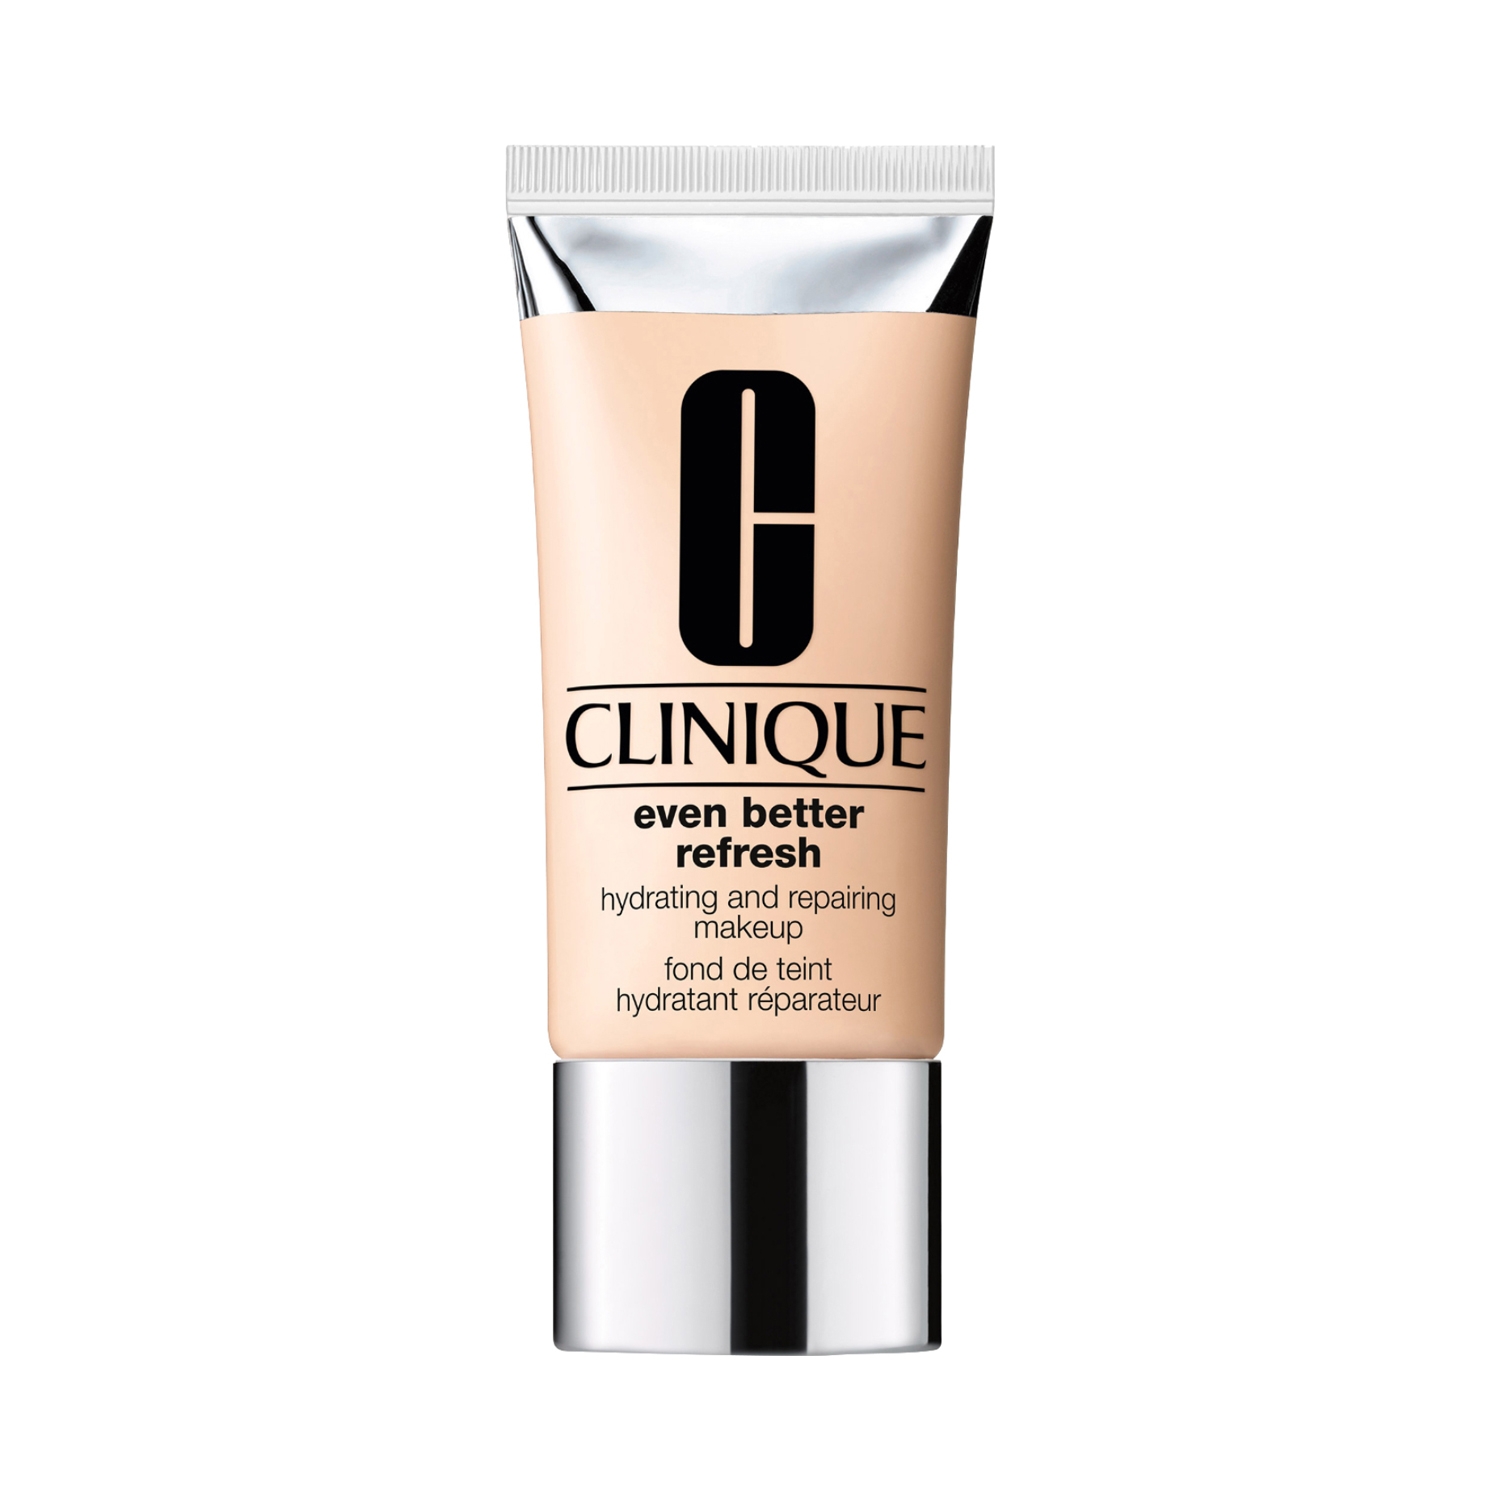 CLINIQUE | CLINIQUE Even Better Refresh Hydrating And Repairing Makeup Foundation - CN 10 Alabaster​ (30ml)